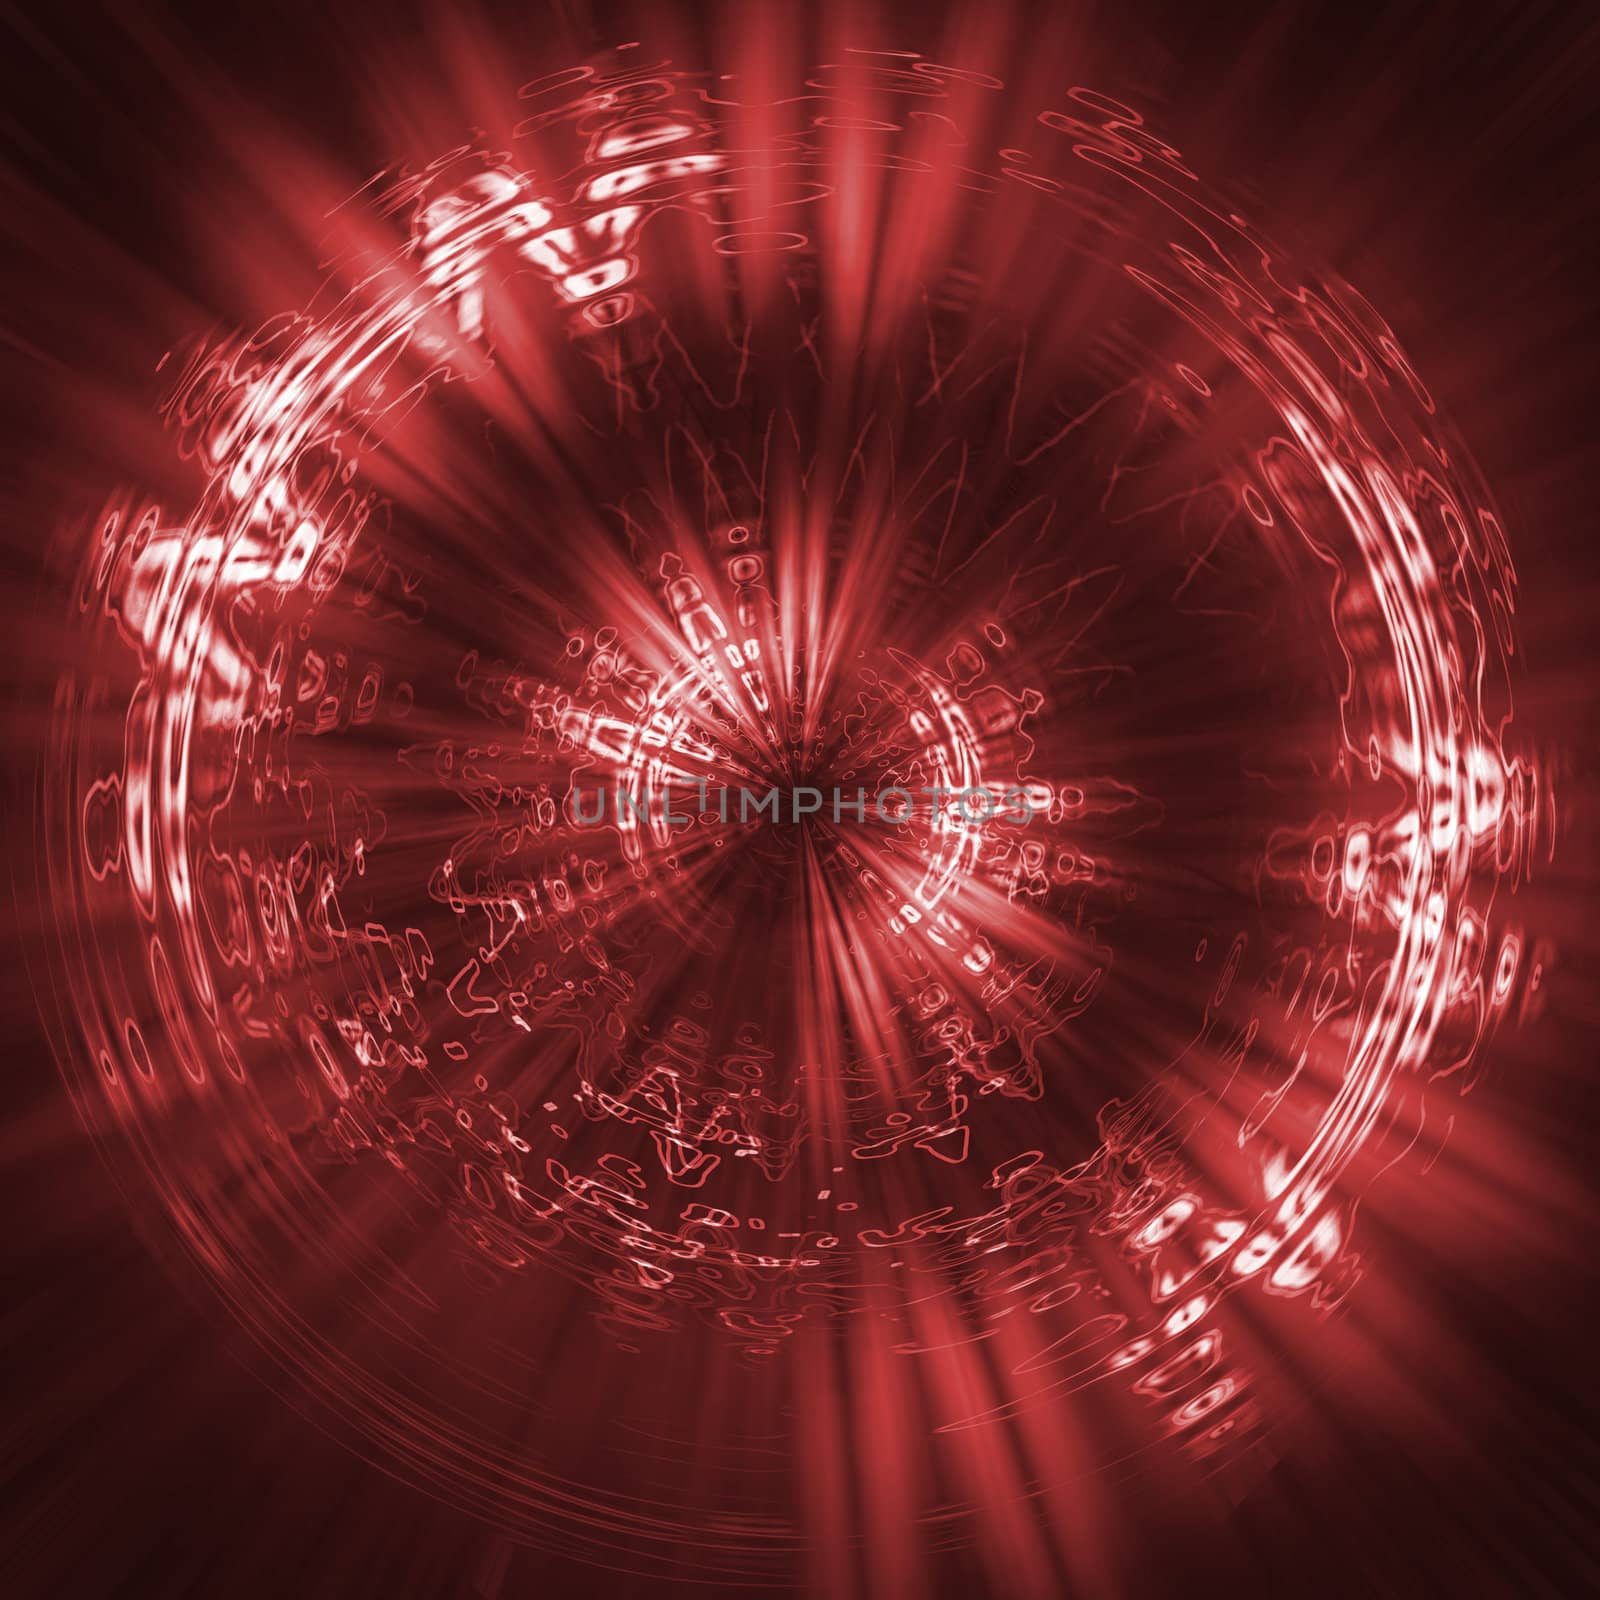 Futuristic background red. Elements of particles, lines, abstract figures and the dim lines of light